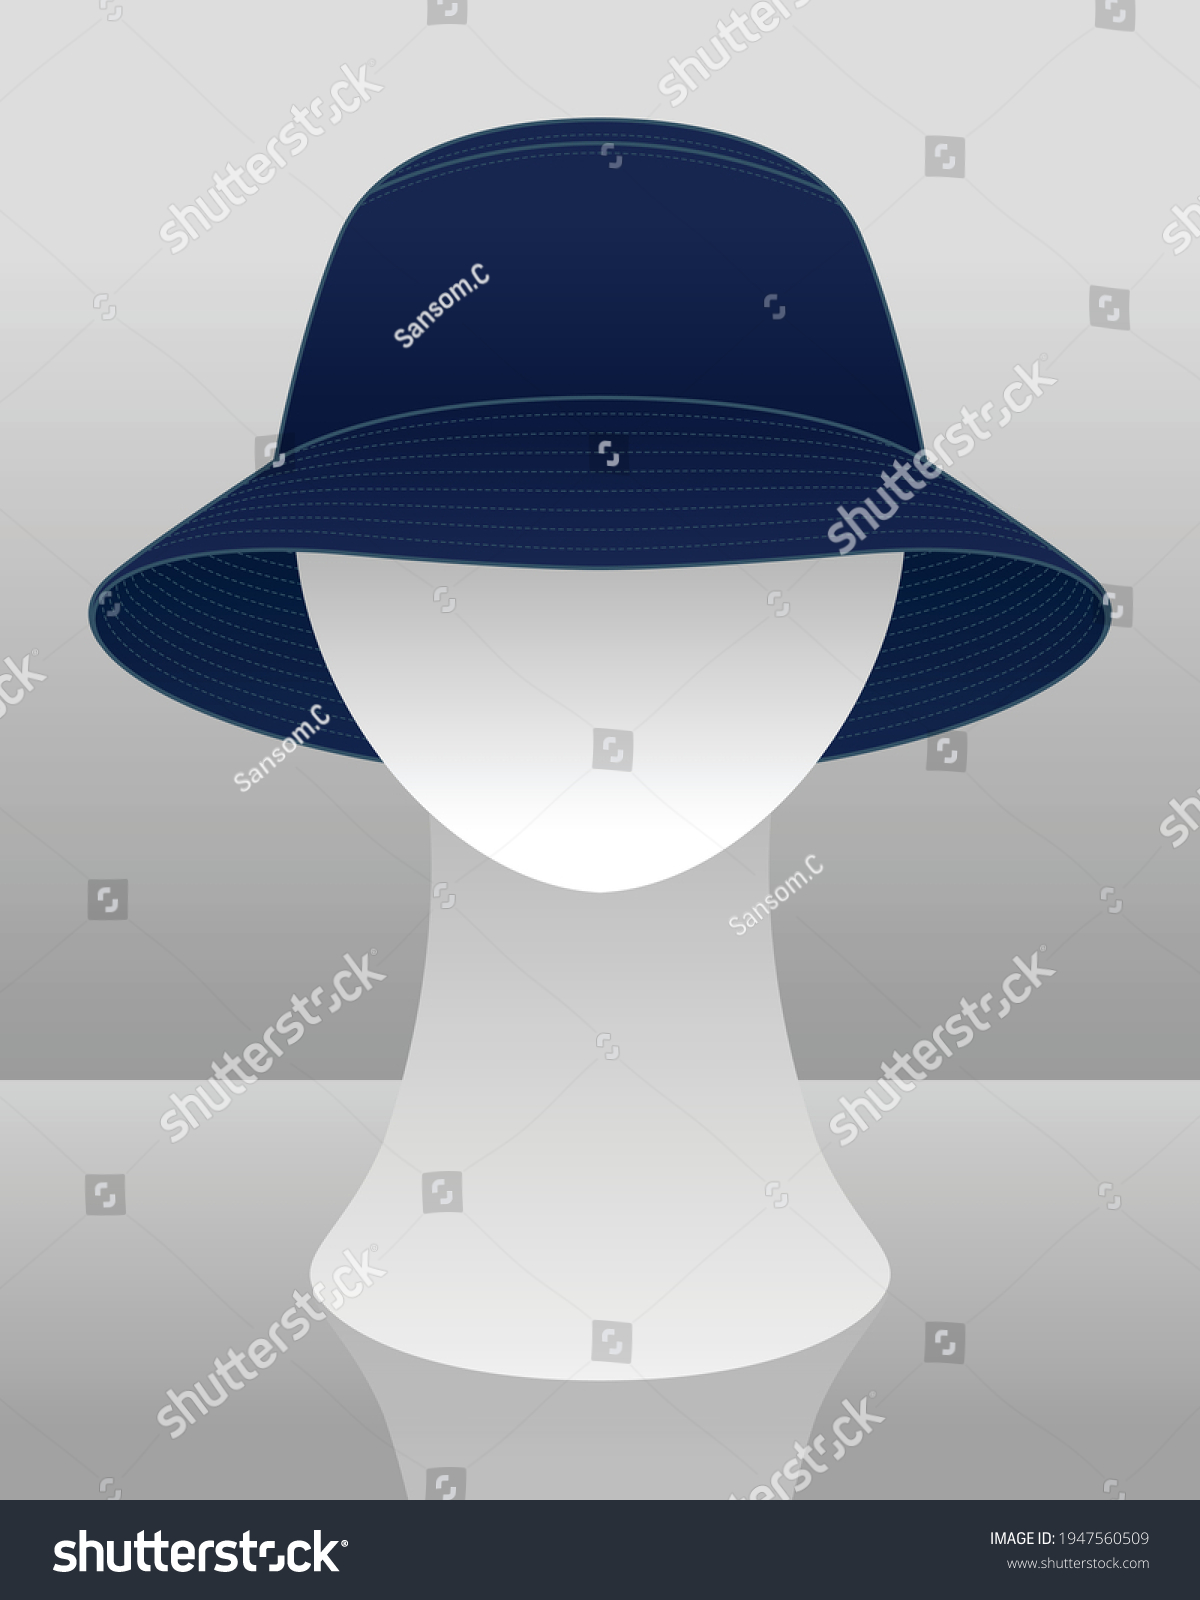 Blank Navy Blue Bucket Hat Template Stock Vector (Royalty Free ...